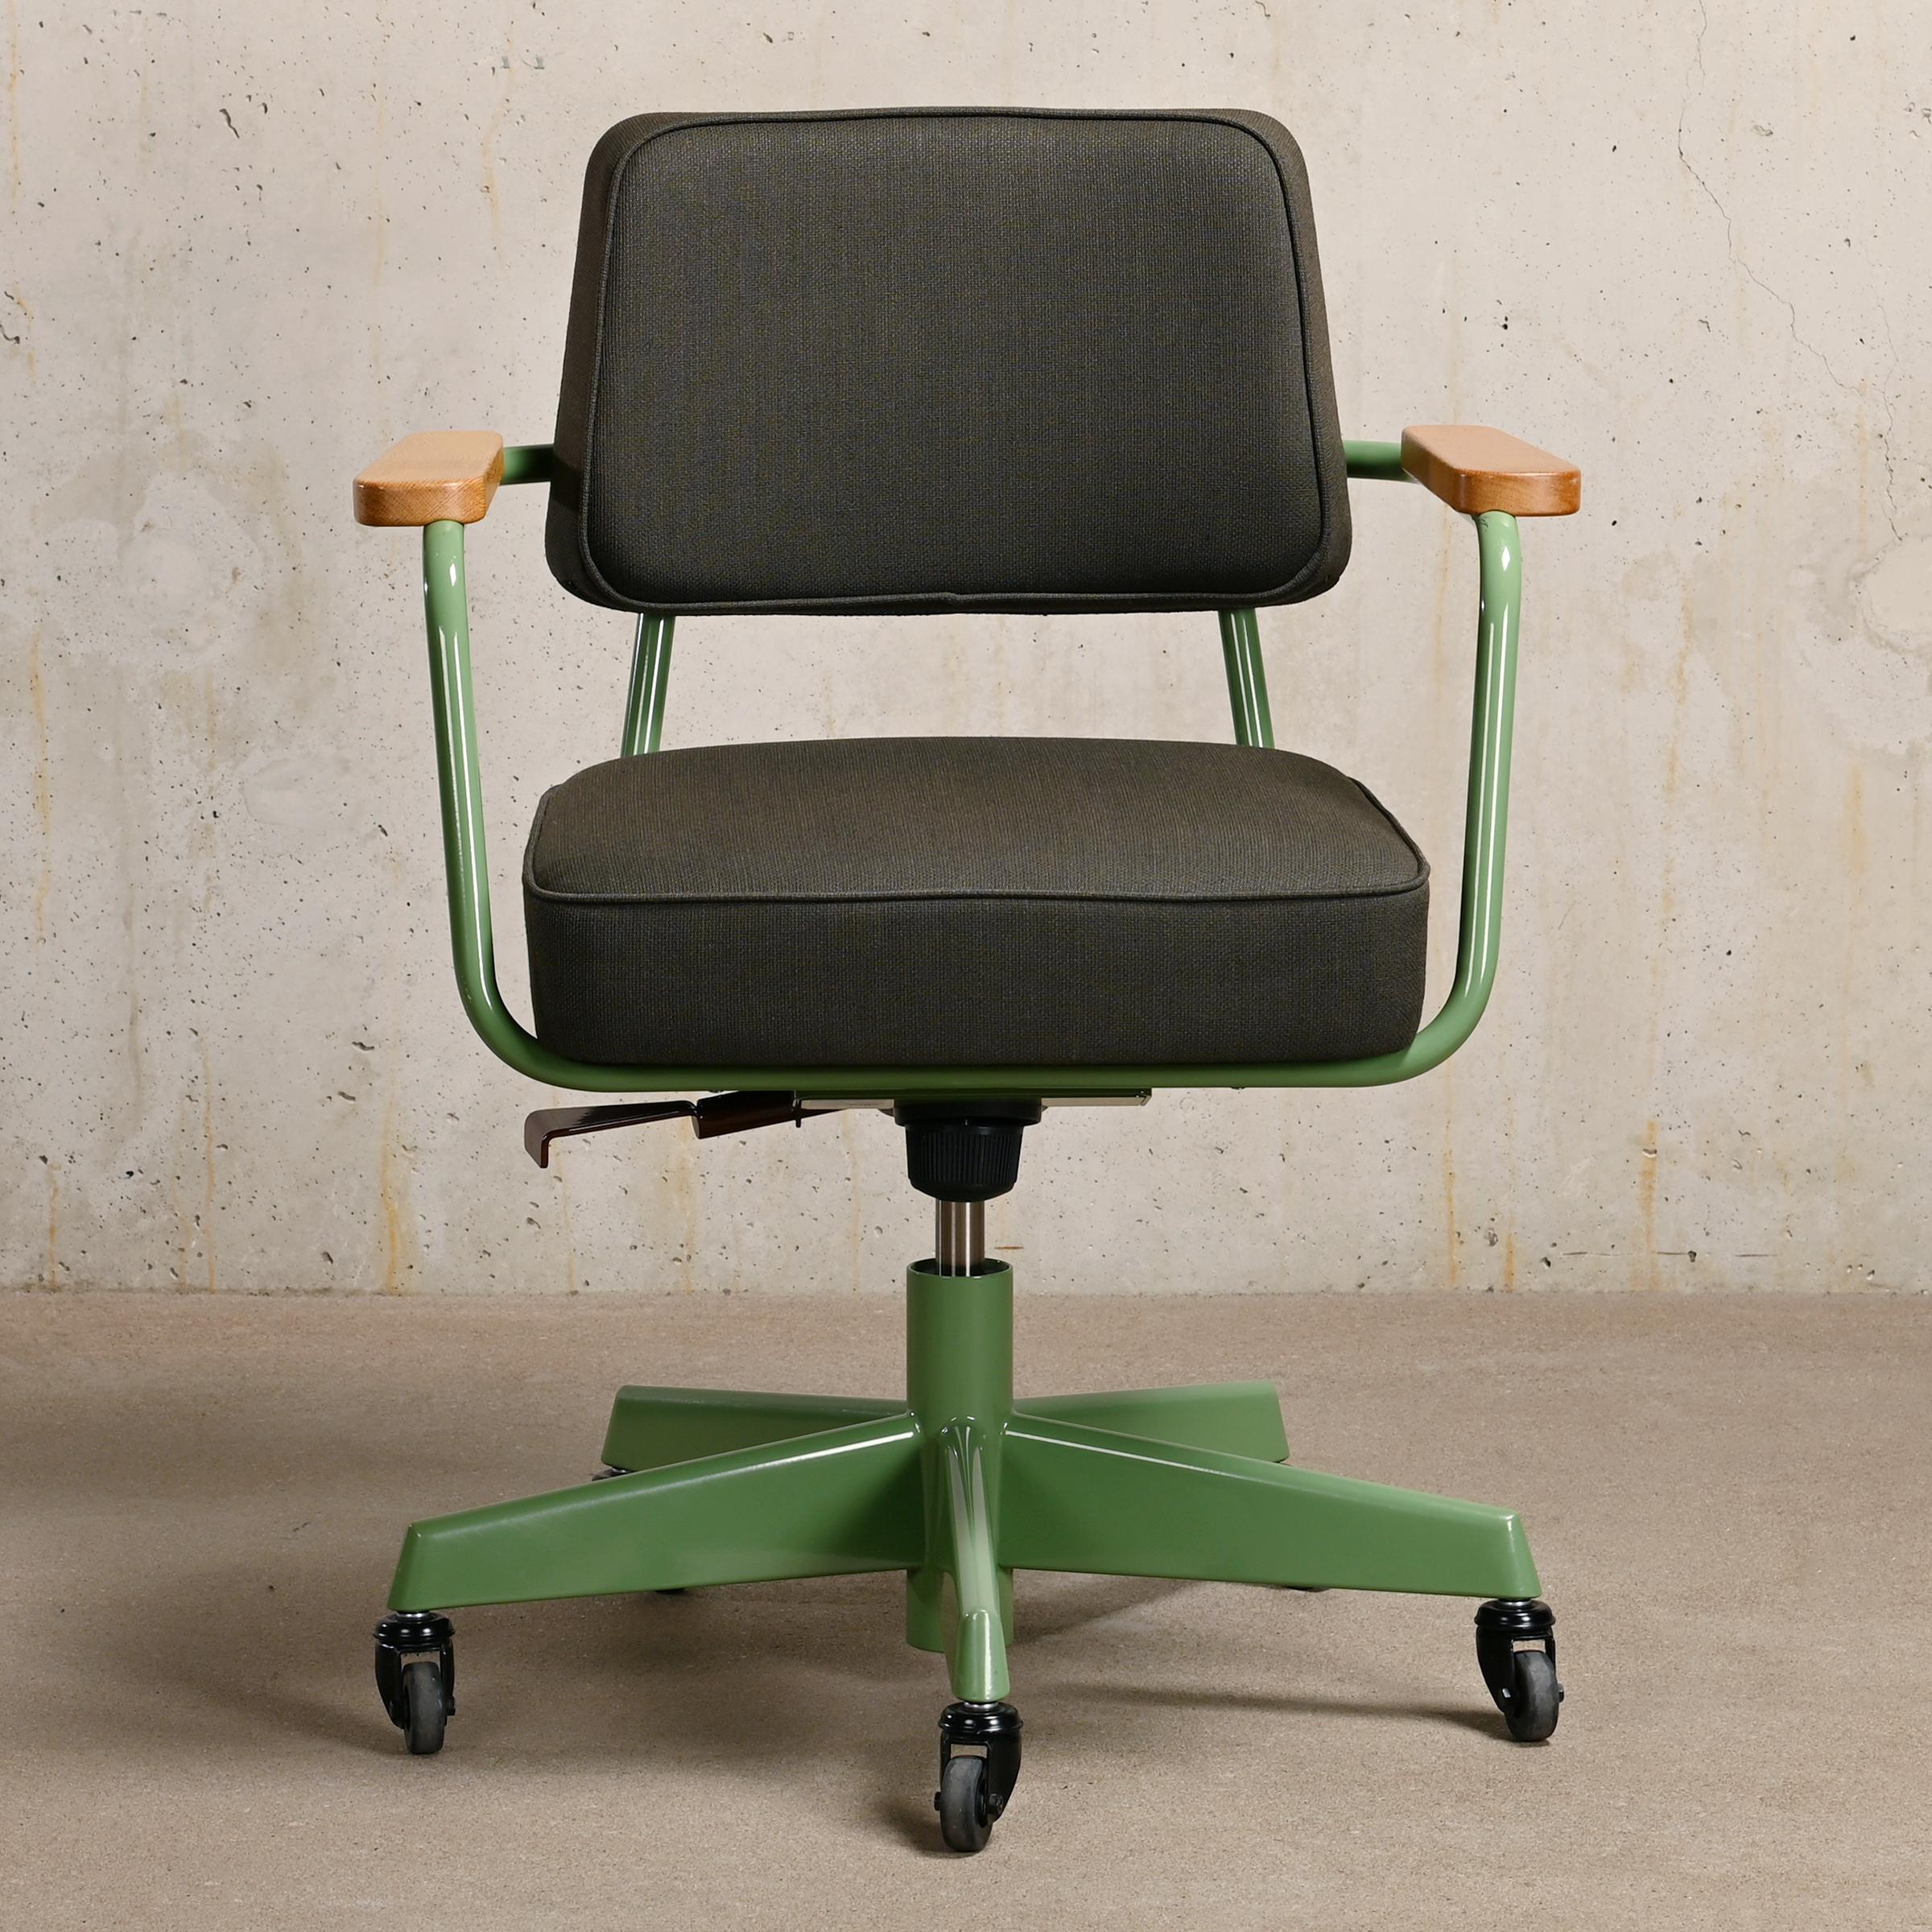 Powder-Coated Jean Prouvé Fauteuil Direction Pivotant G-Star Raw Edition for Vitra, 1951